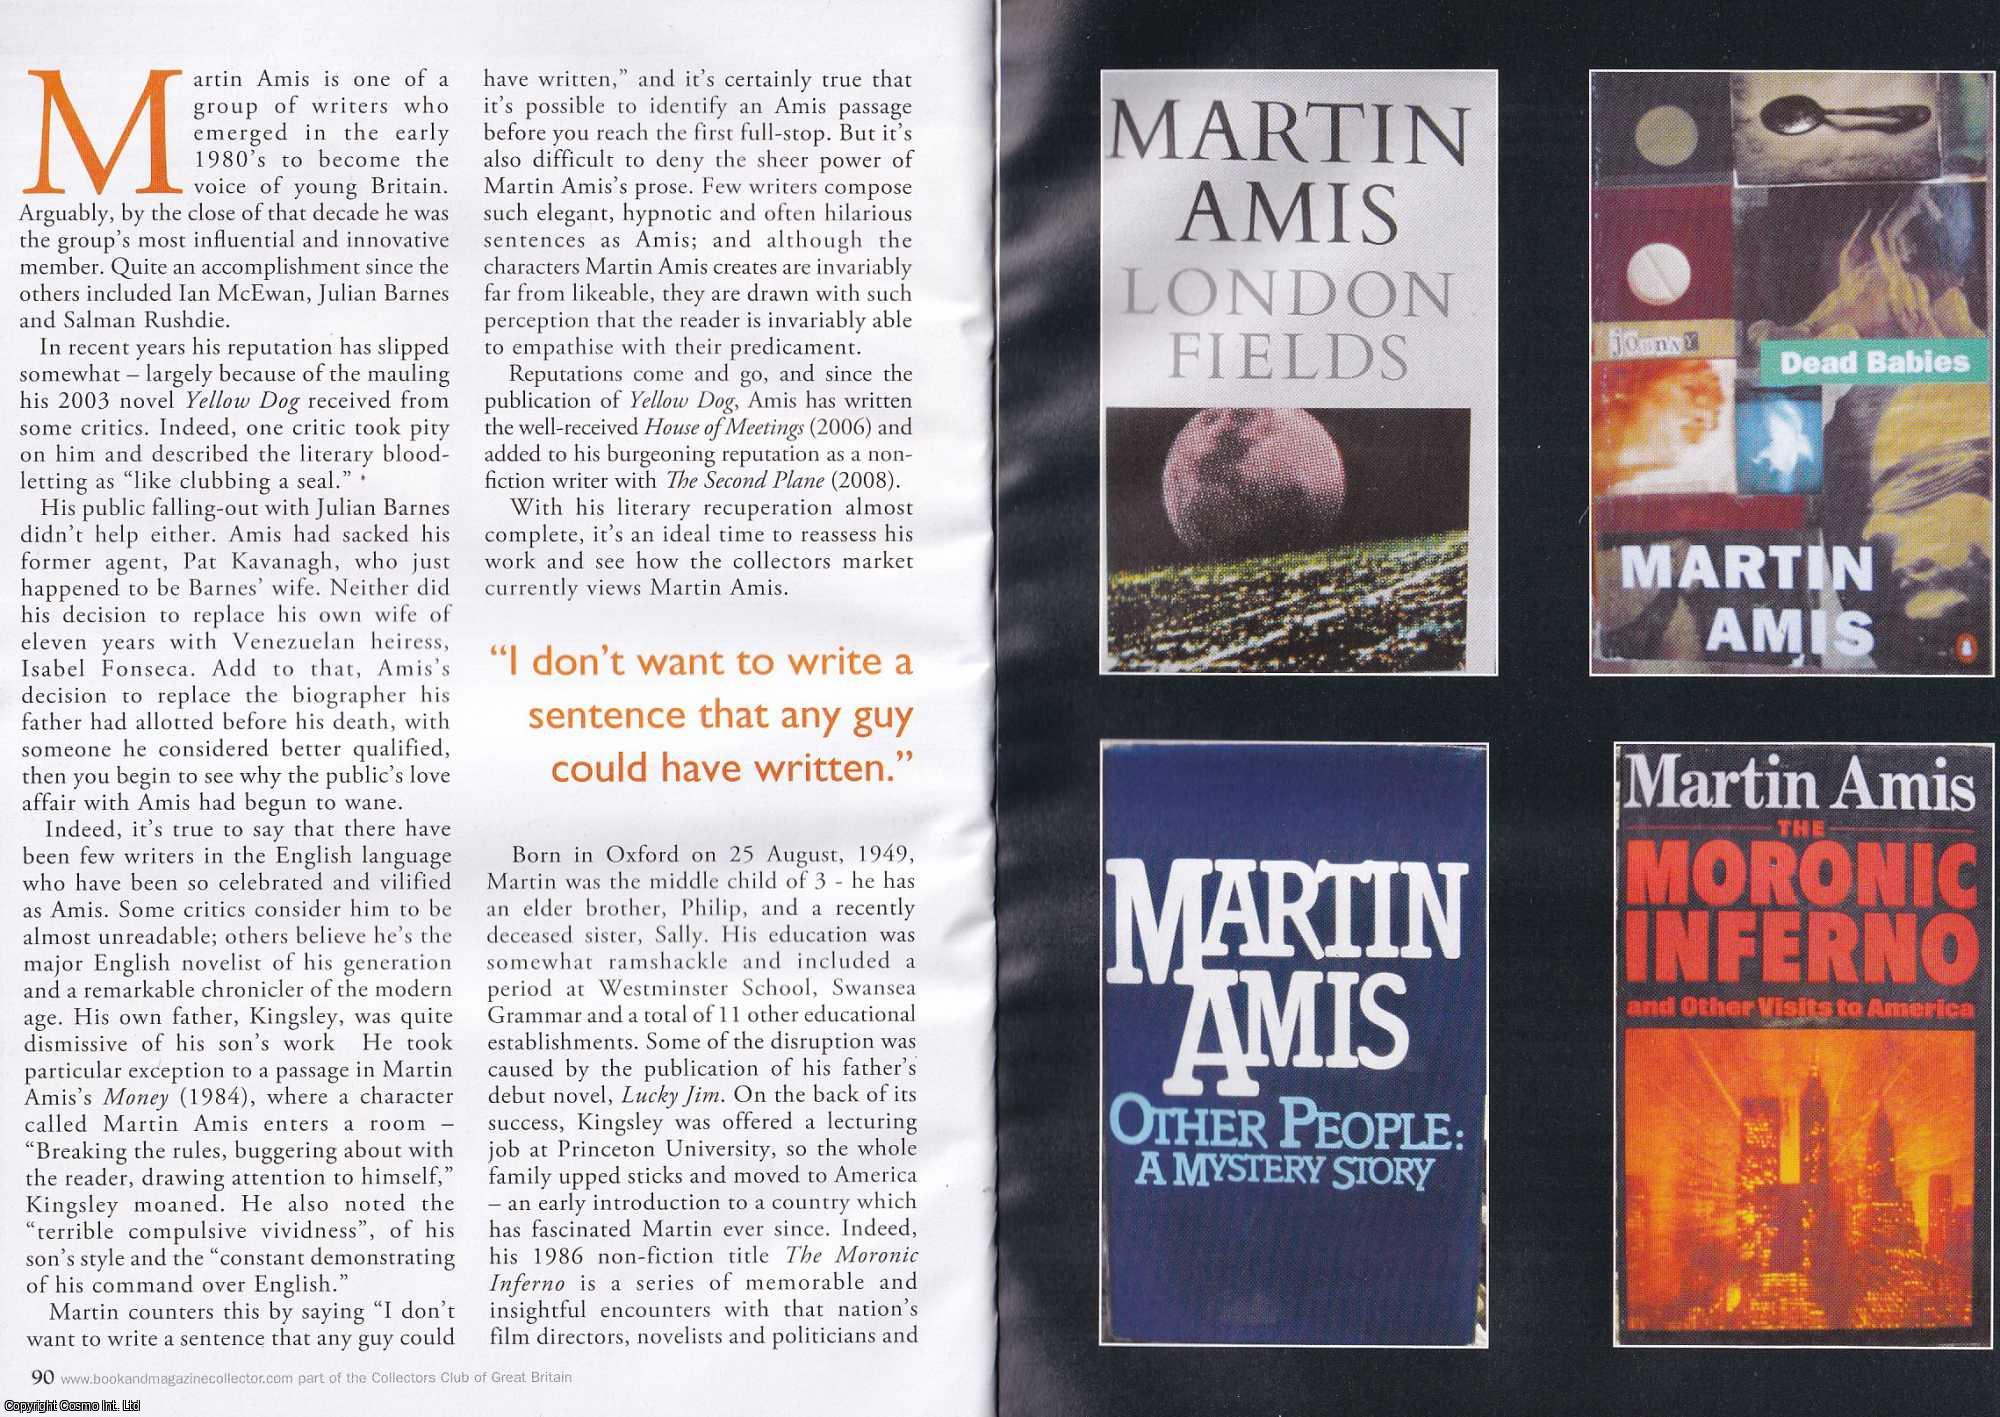 David Howard - Martin Amis. This is an original article separated from an issue of The Book & Magazine Collector publication, 2010.